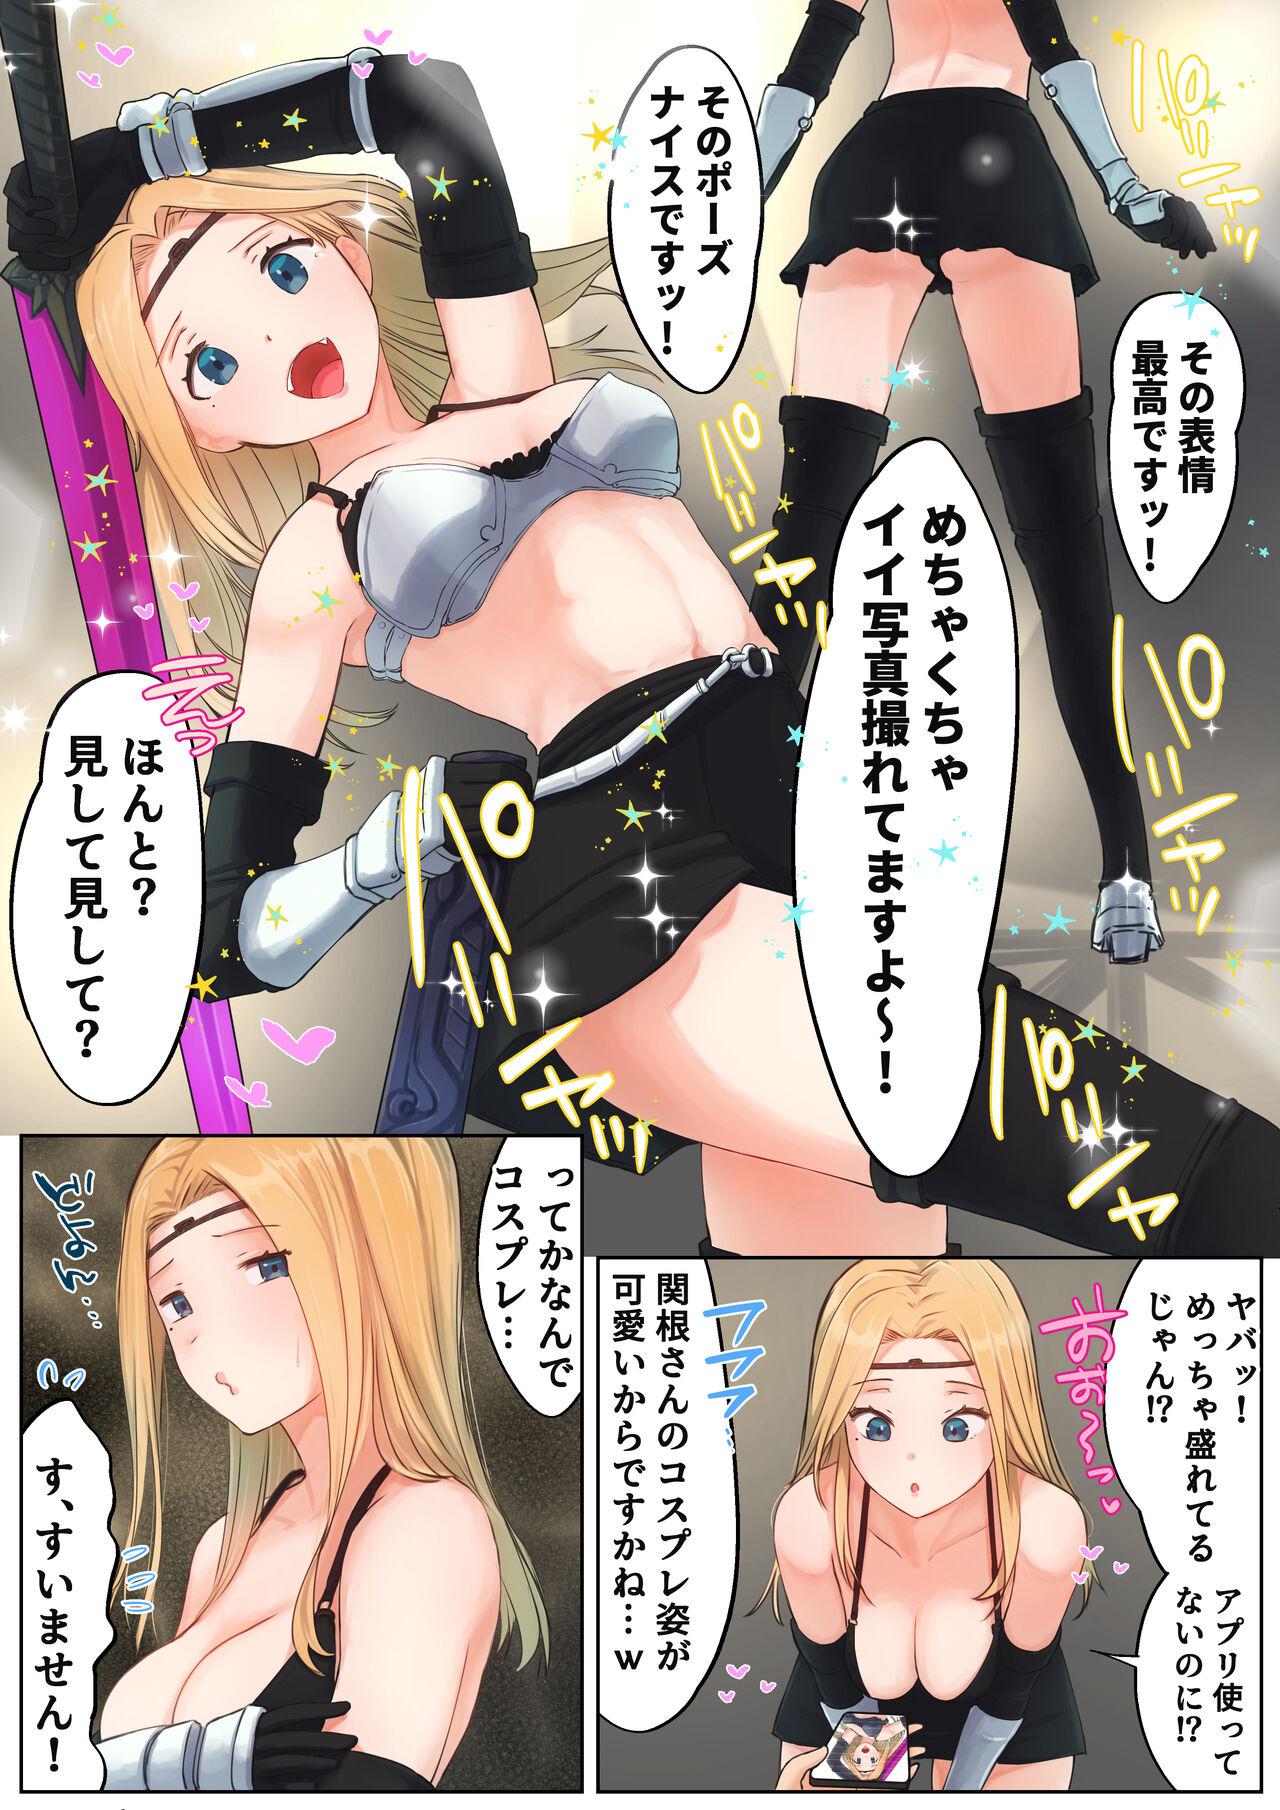 Gay College クラスメイトのギャルと始めるハメ撮りバイ - Original Point Of View - Page 4